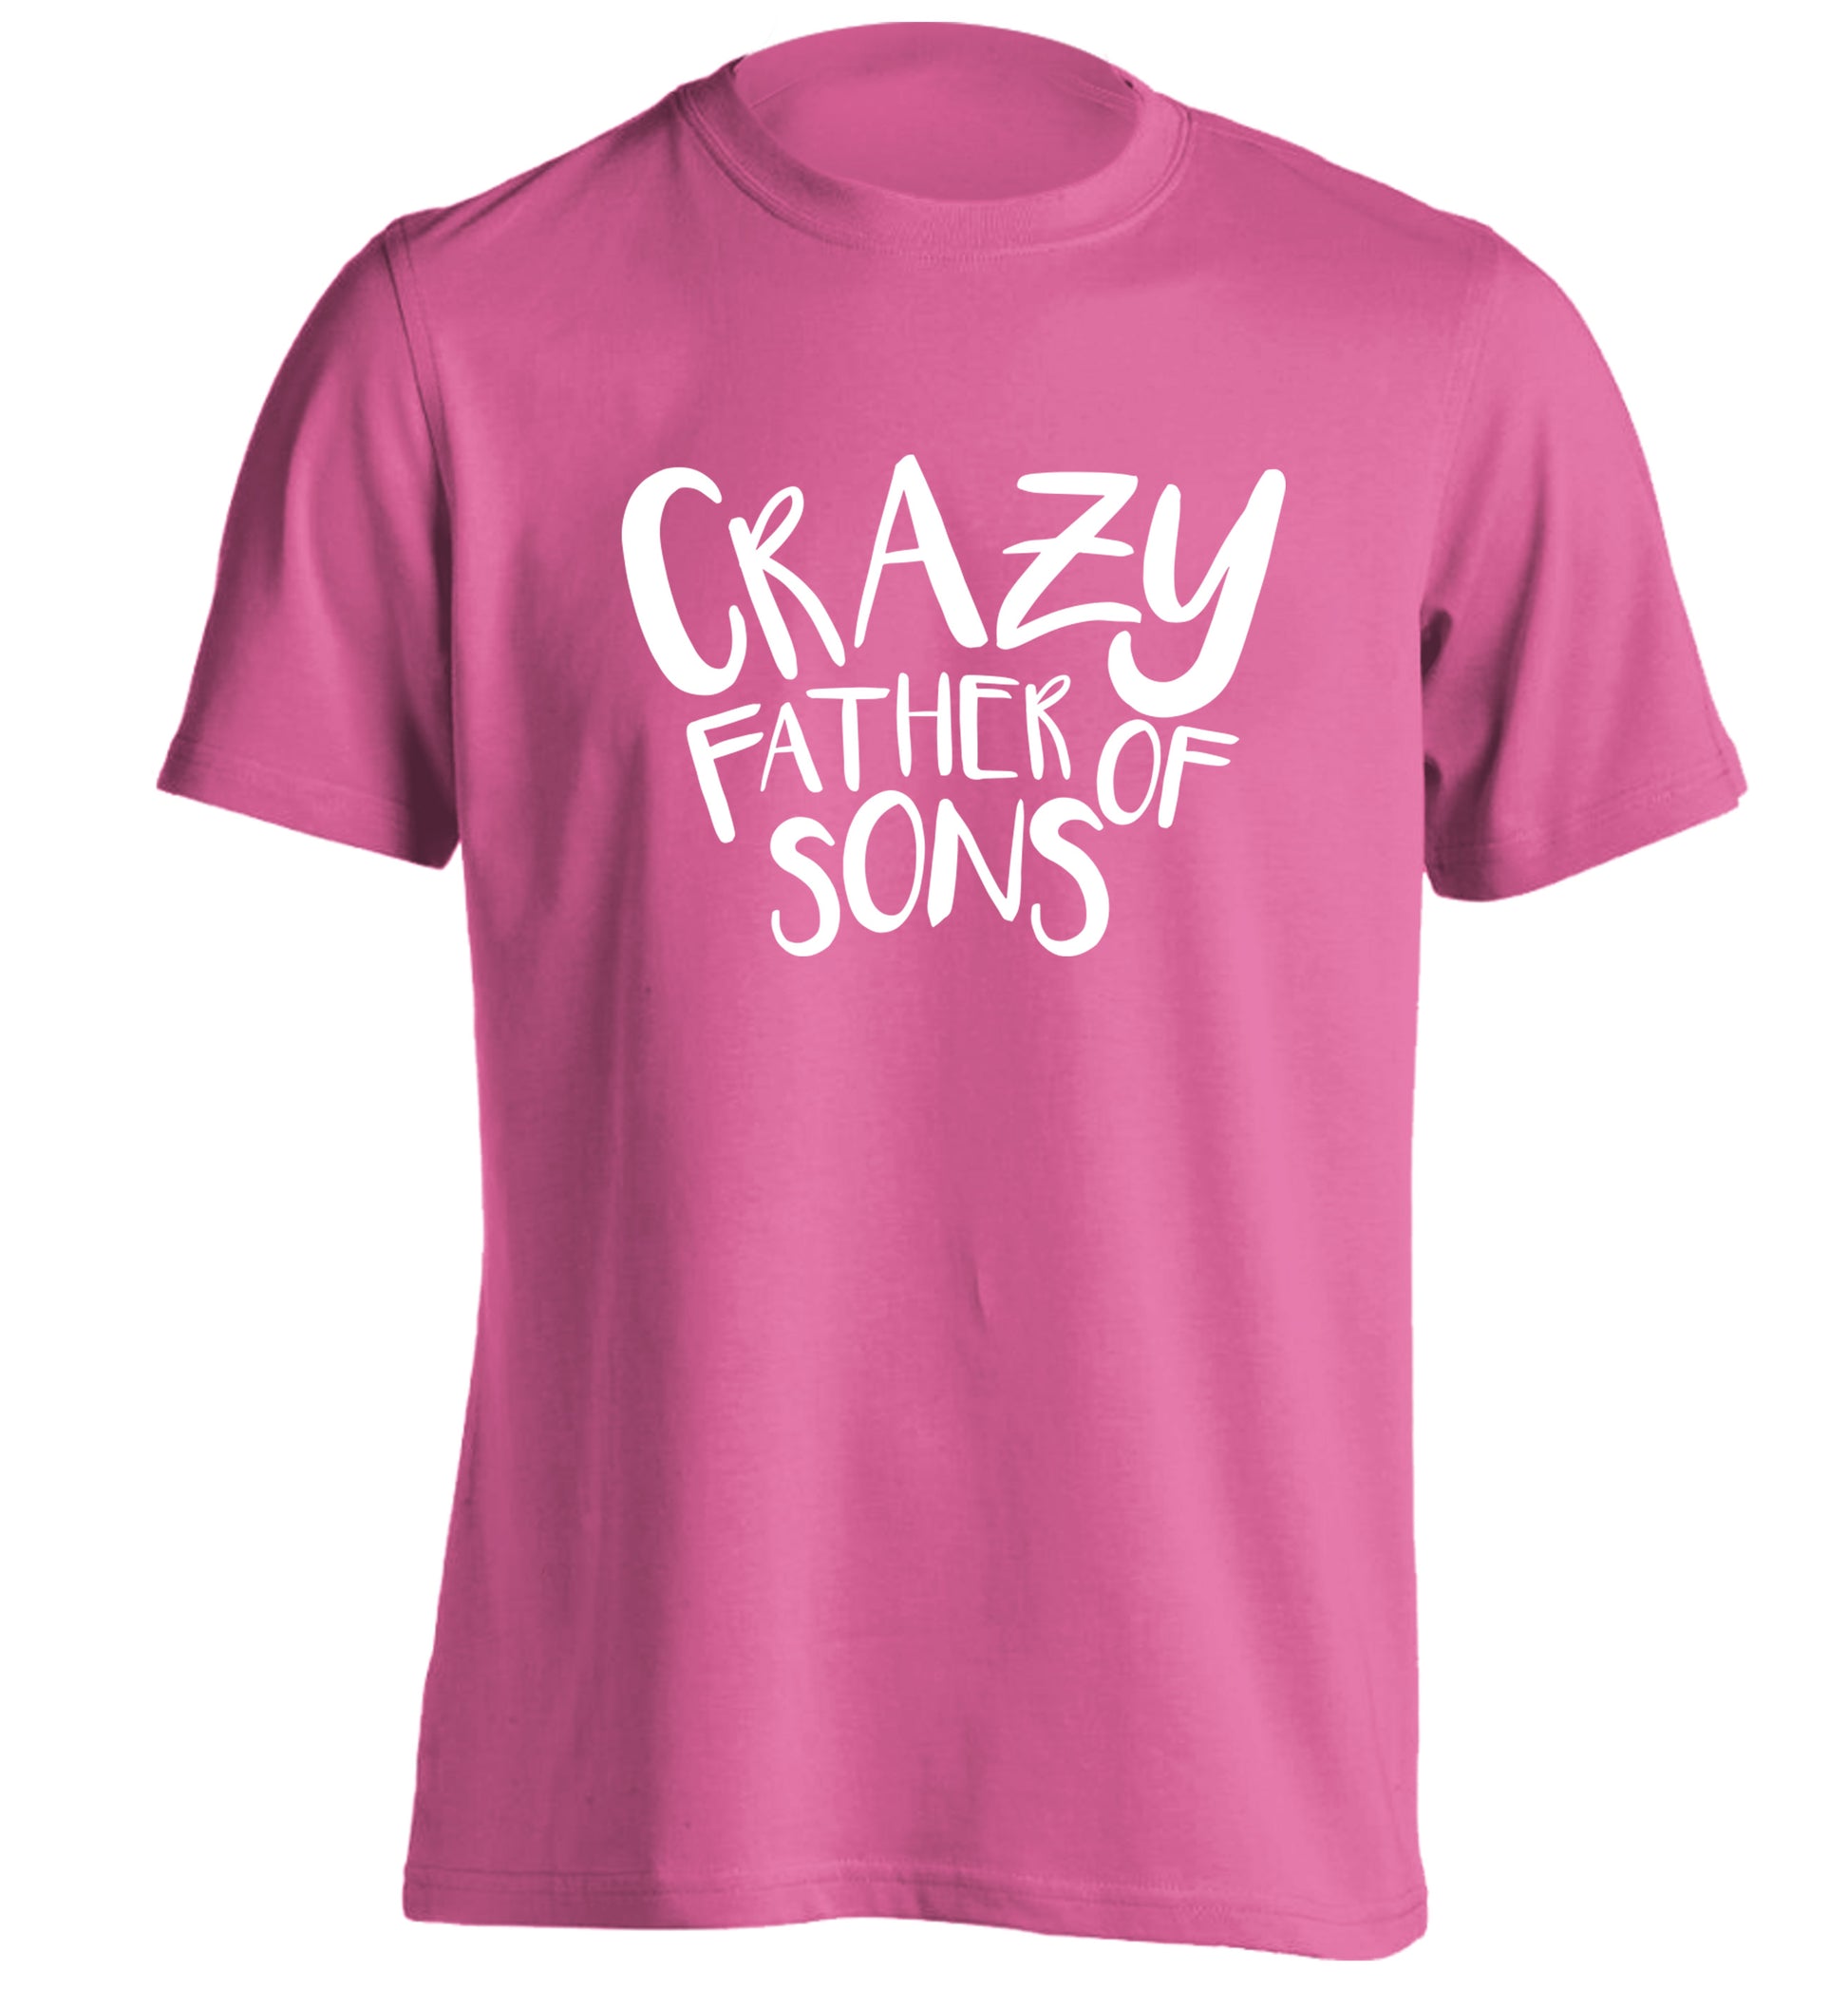 Crazy father of sons adults unisex pink Tshirt 2XL